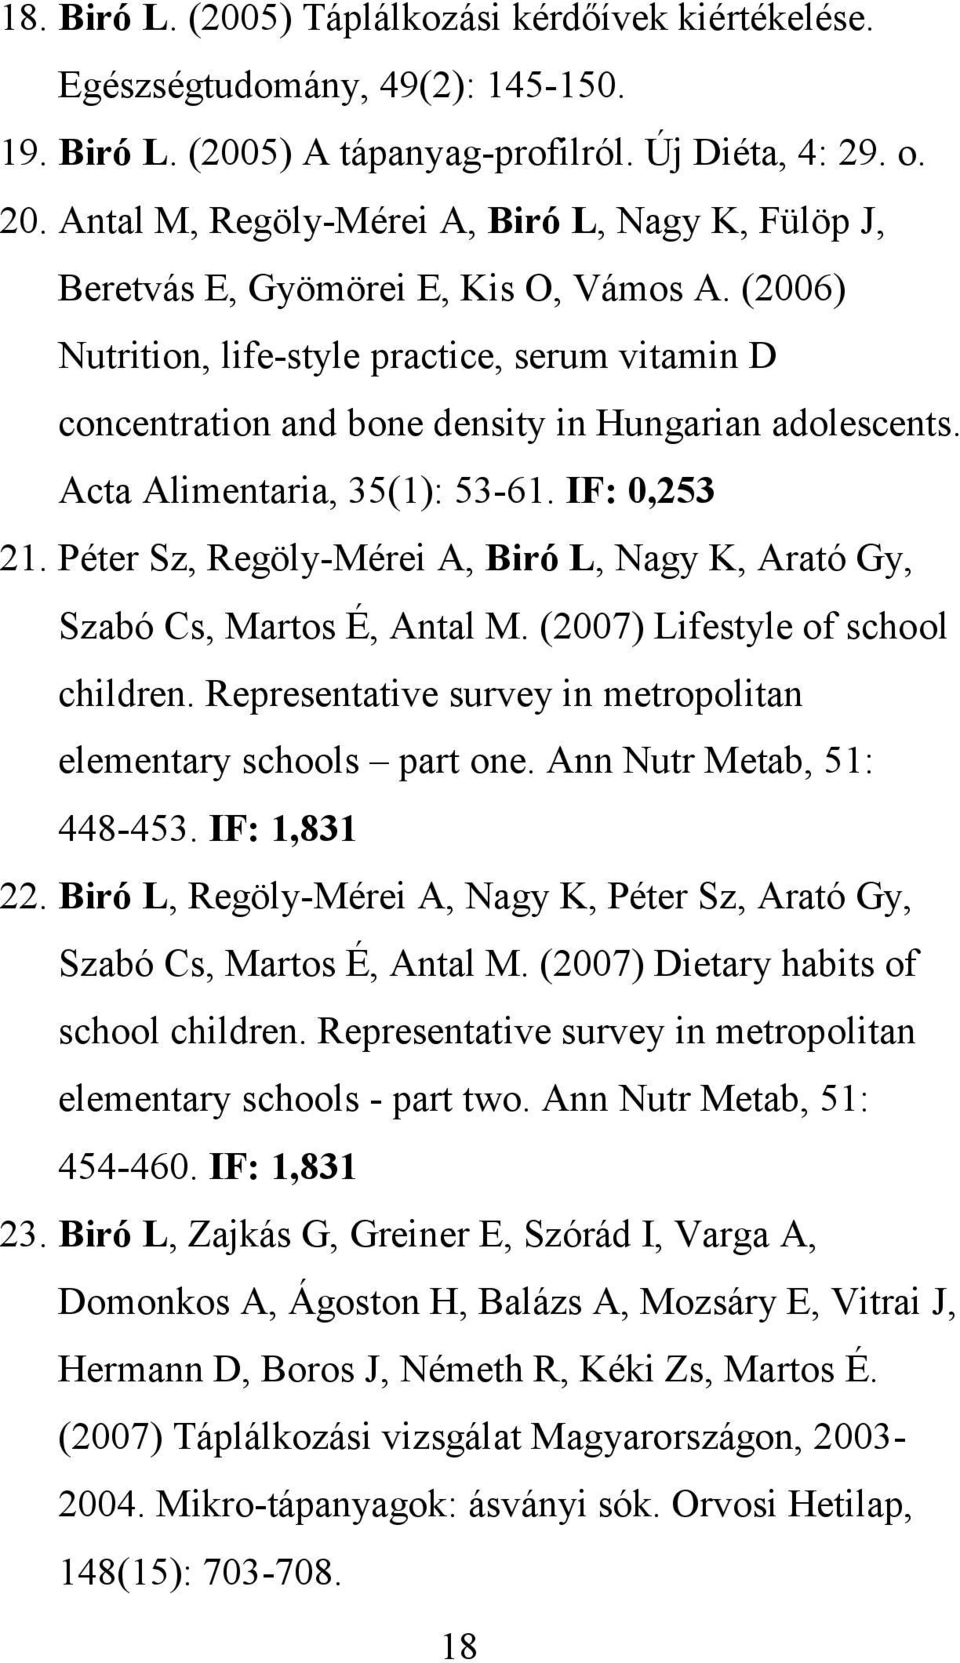 (2006) Nutrition, life-style practice, serum vitamin D concentration and bone density in Hungarian adolescents. Acta Alimentaria, 35(1): 53-61. IF: 0,253 21.